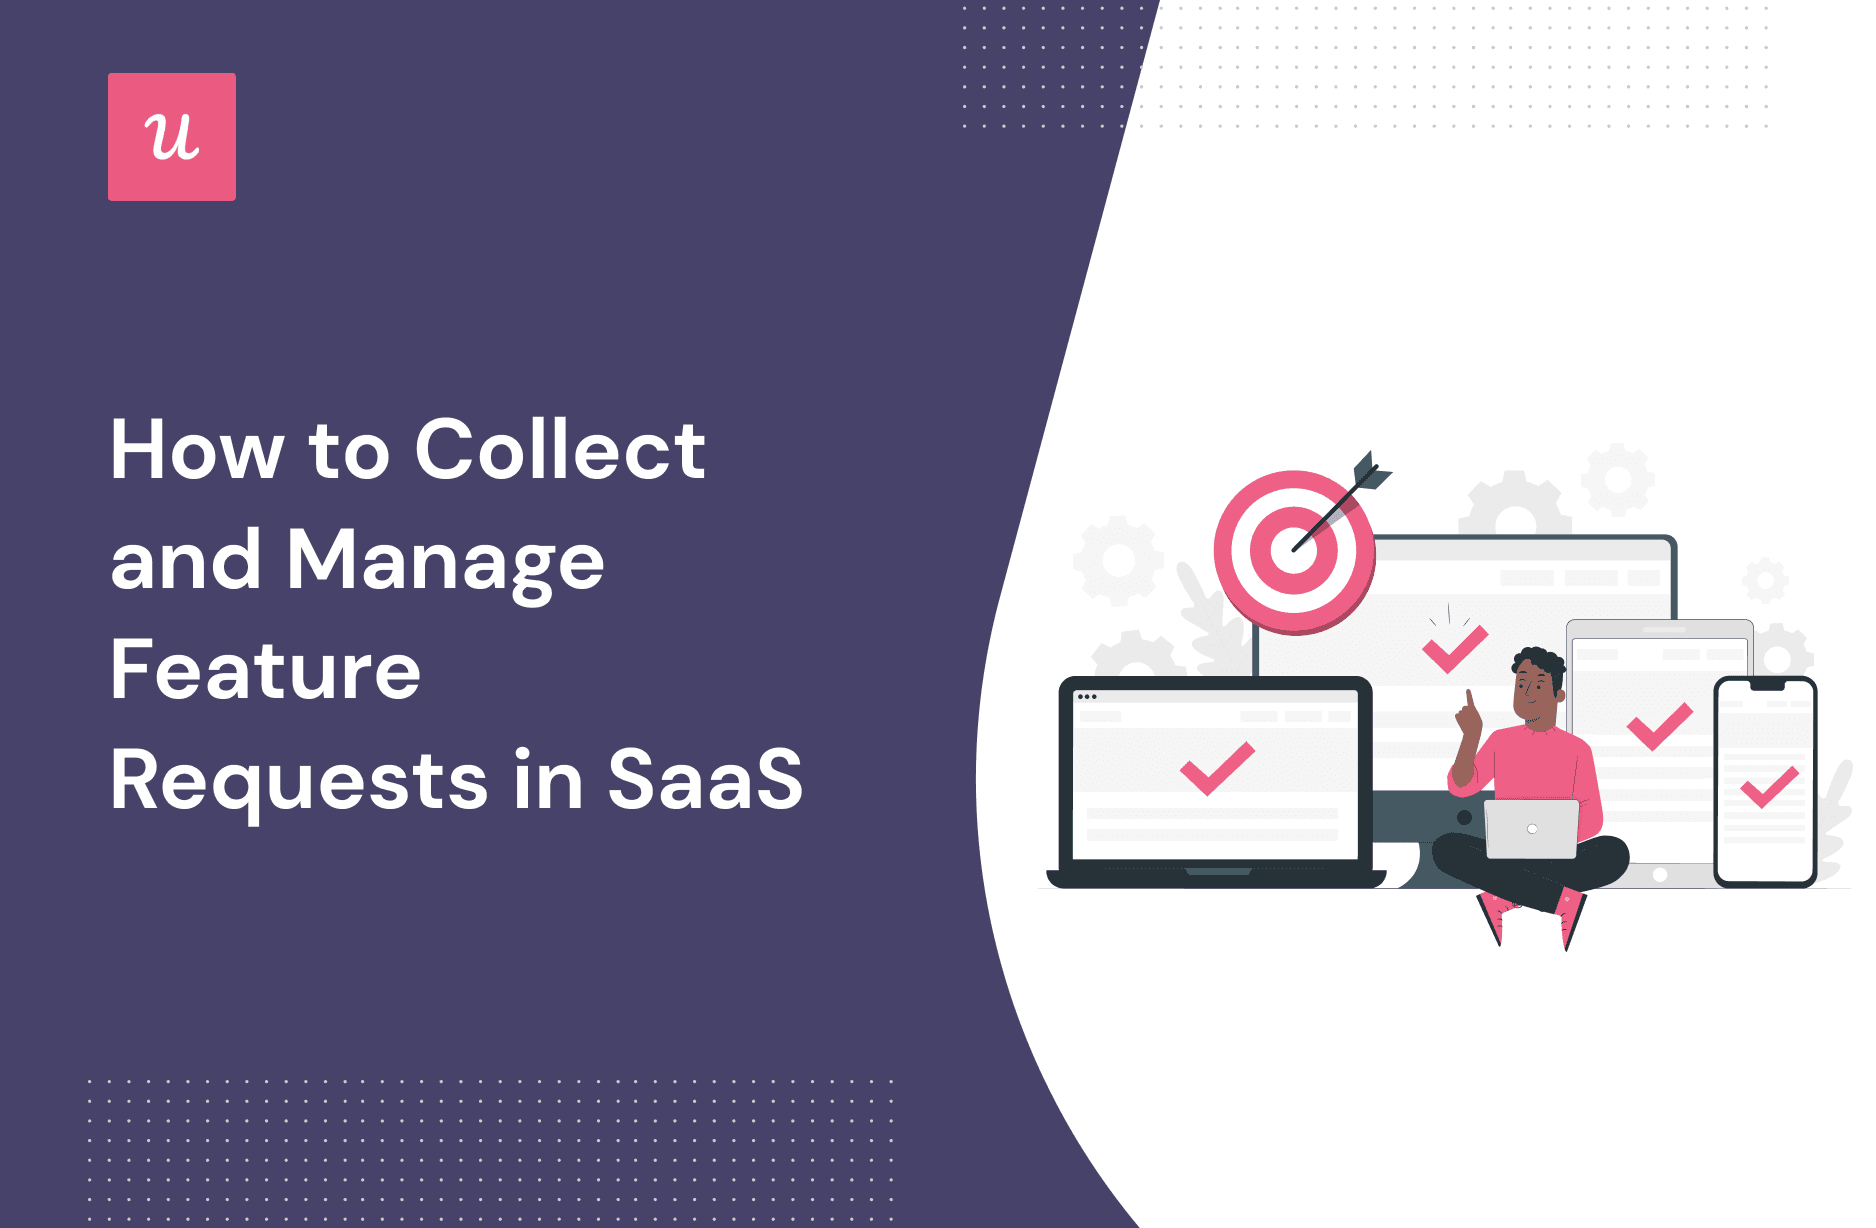 How to Collect and Manage Feature Requests in SaaS